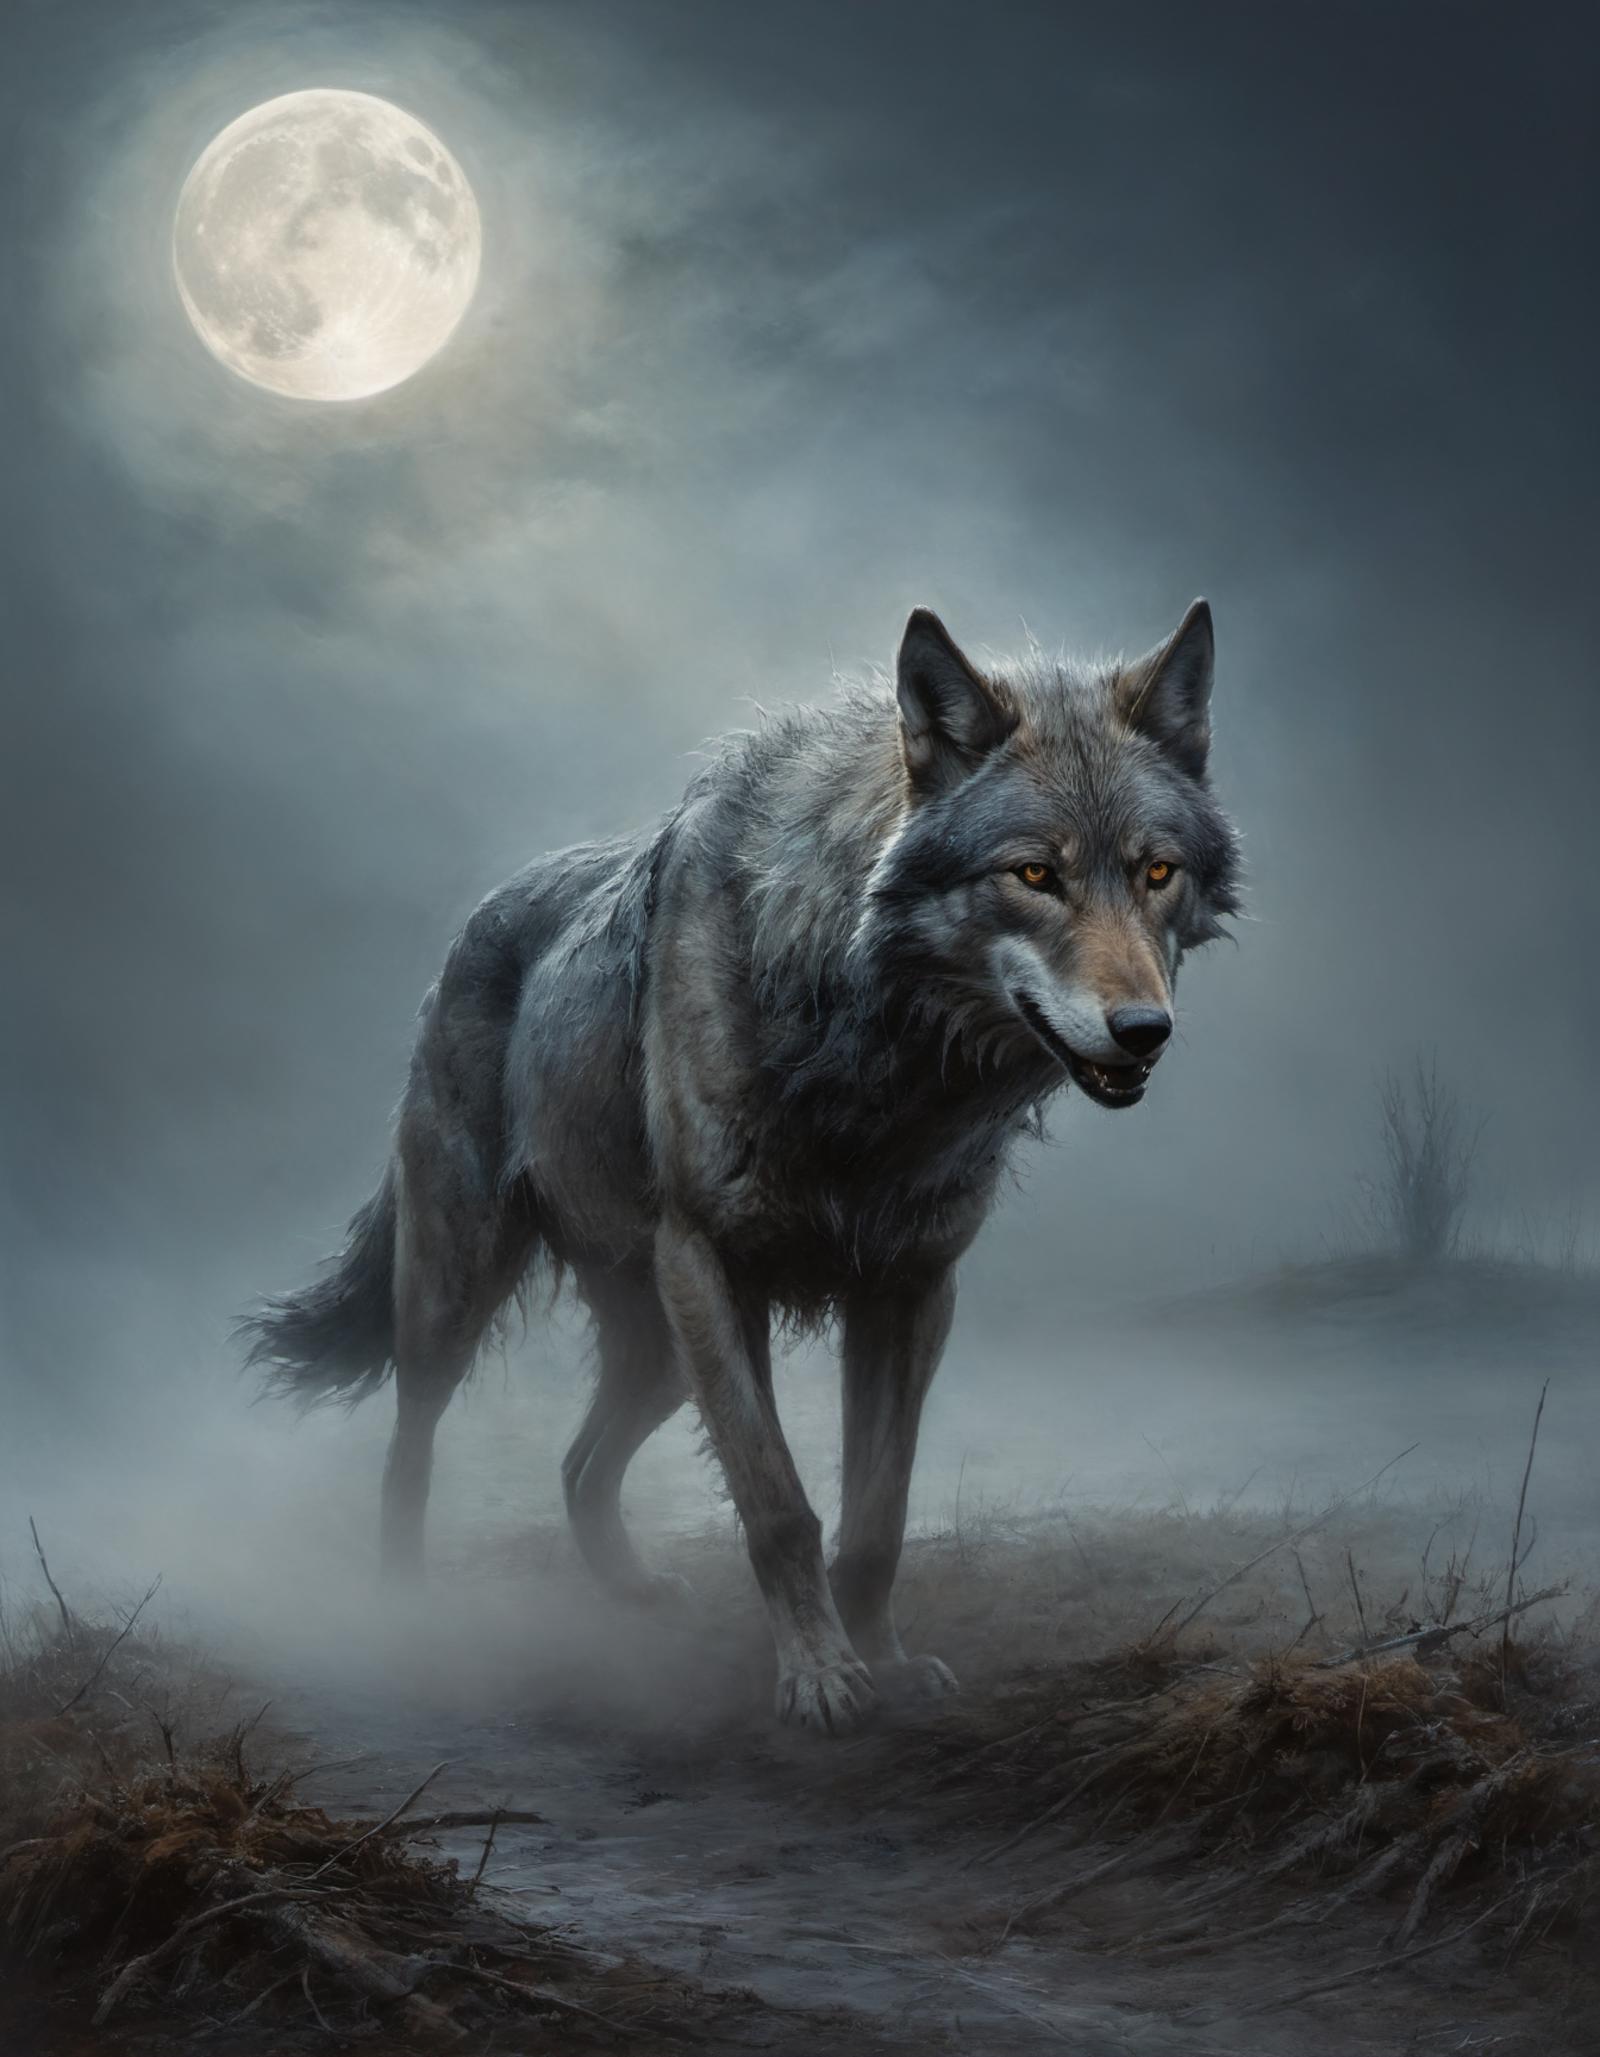 A large wolf with glowing eyes stands on a field at night, with a full moon in the background.